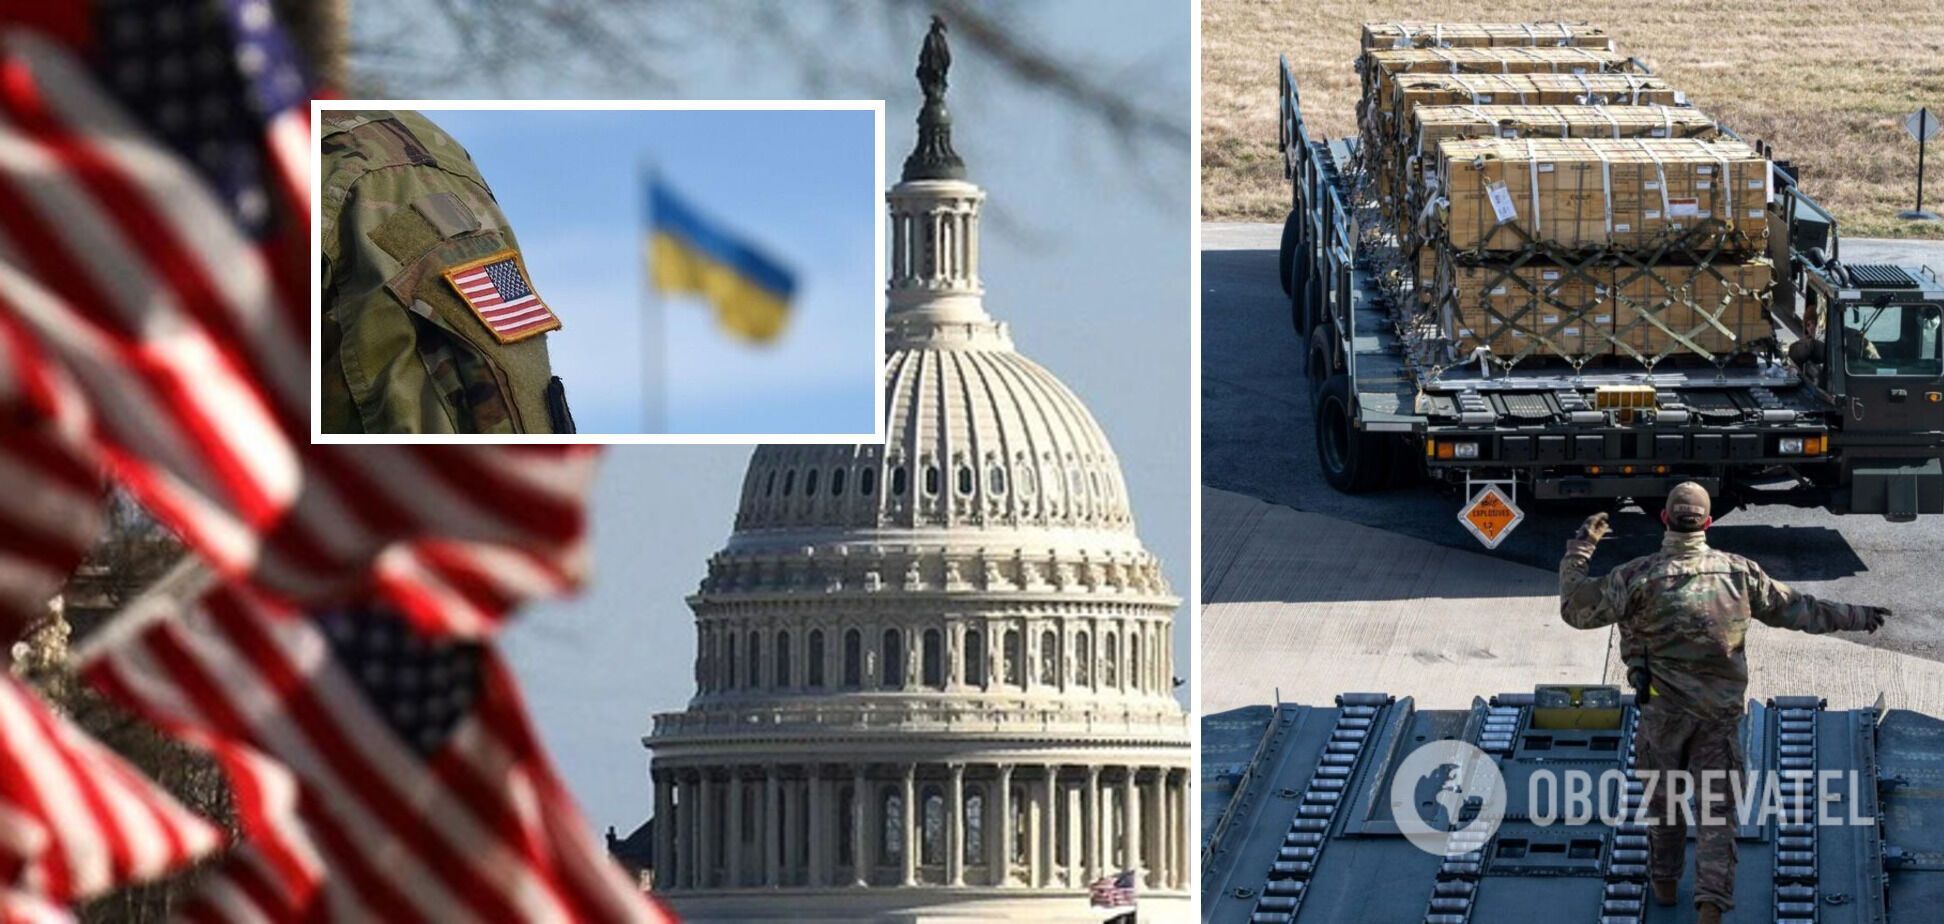 ''No need to make a tragedy'': Danilov spoke out about the delay of US military aid